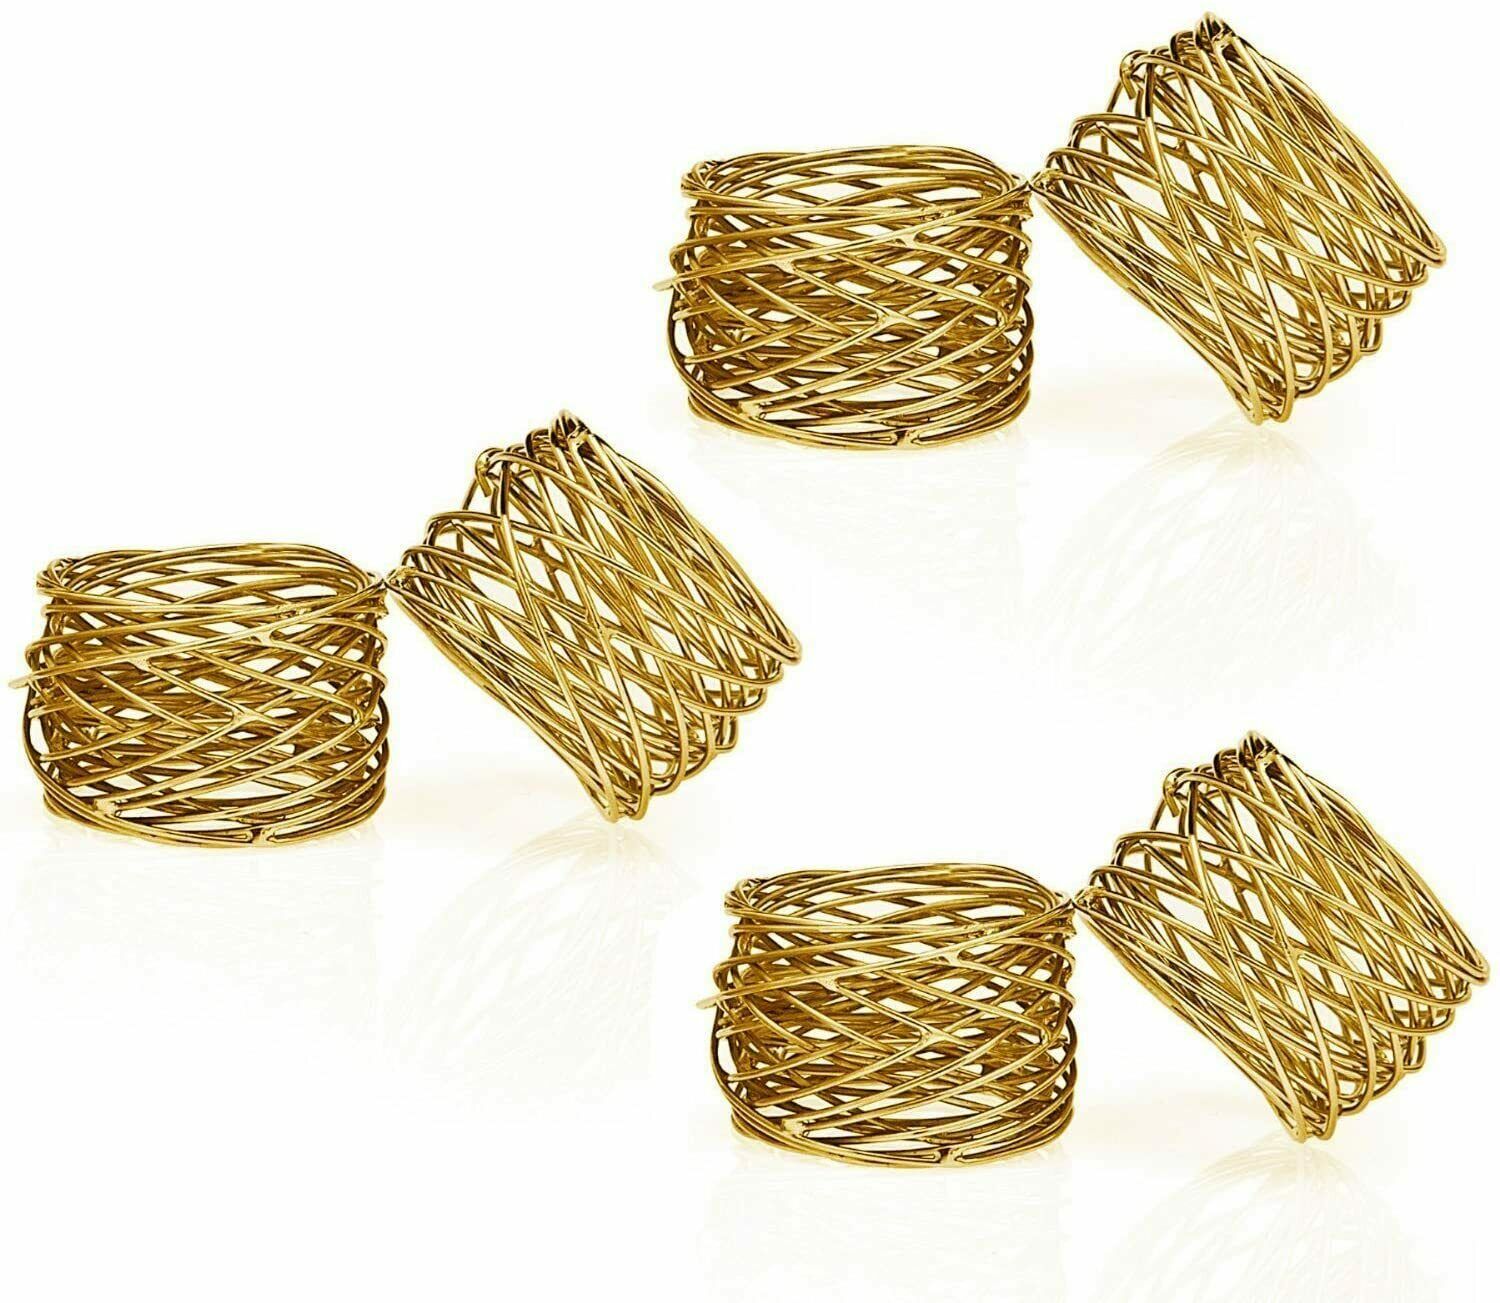 Handmade Gold Round Mesh Napkin Rings Set Of 6 Holder For Dinning Table Parties